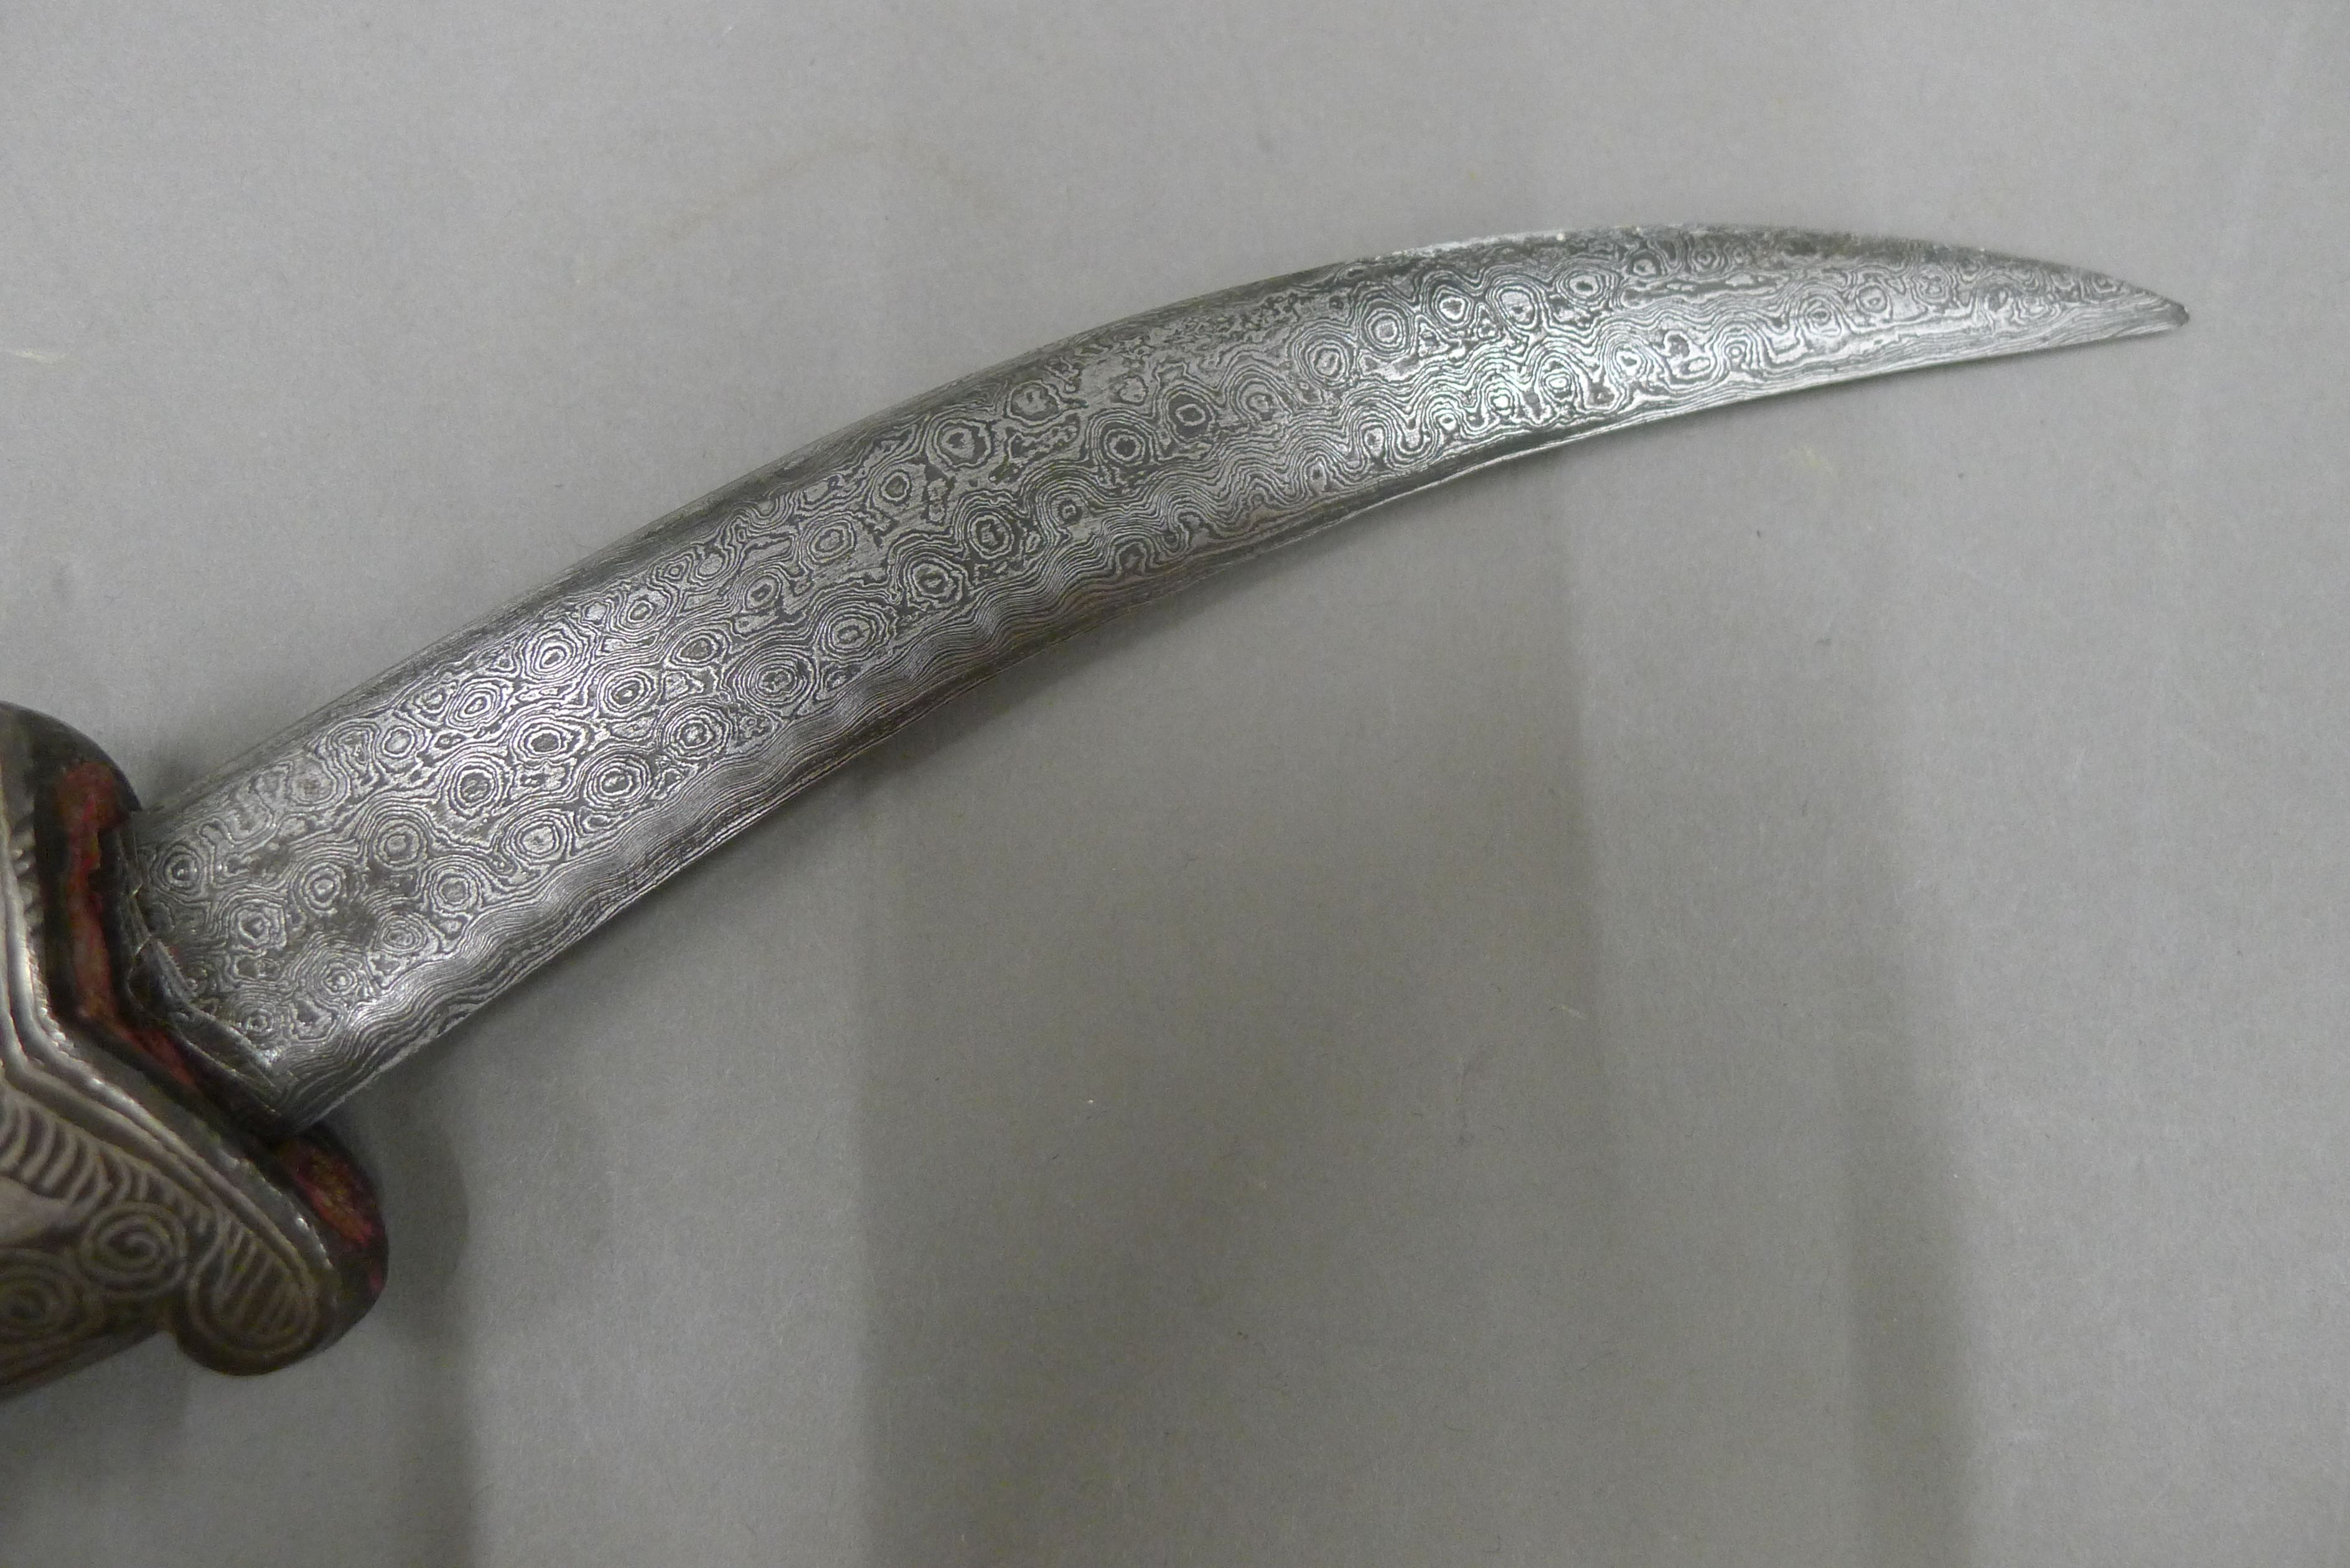 A 19th century Persian knife, the steel scabbard and grip inlaid with silver, - Image 5 of 6